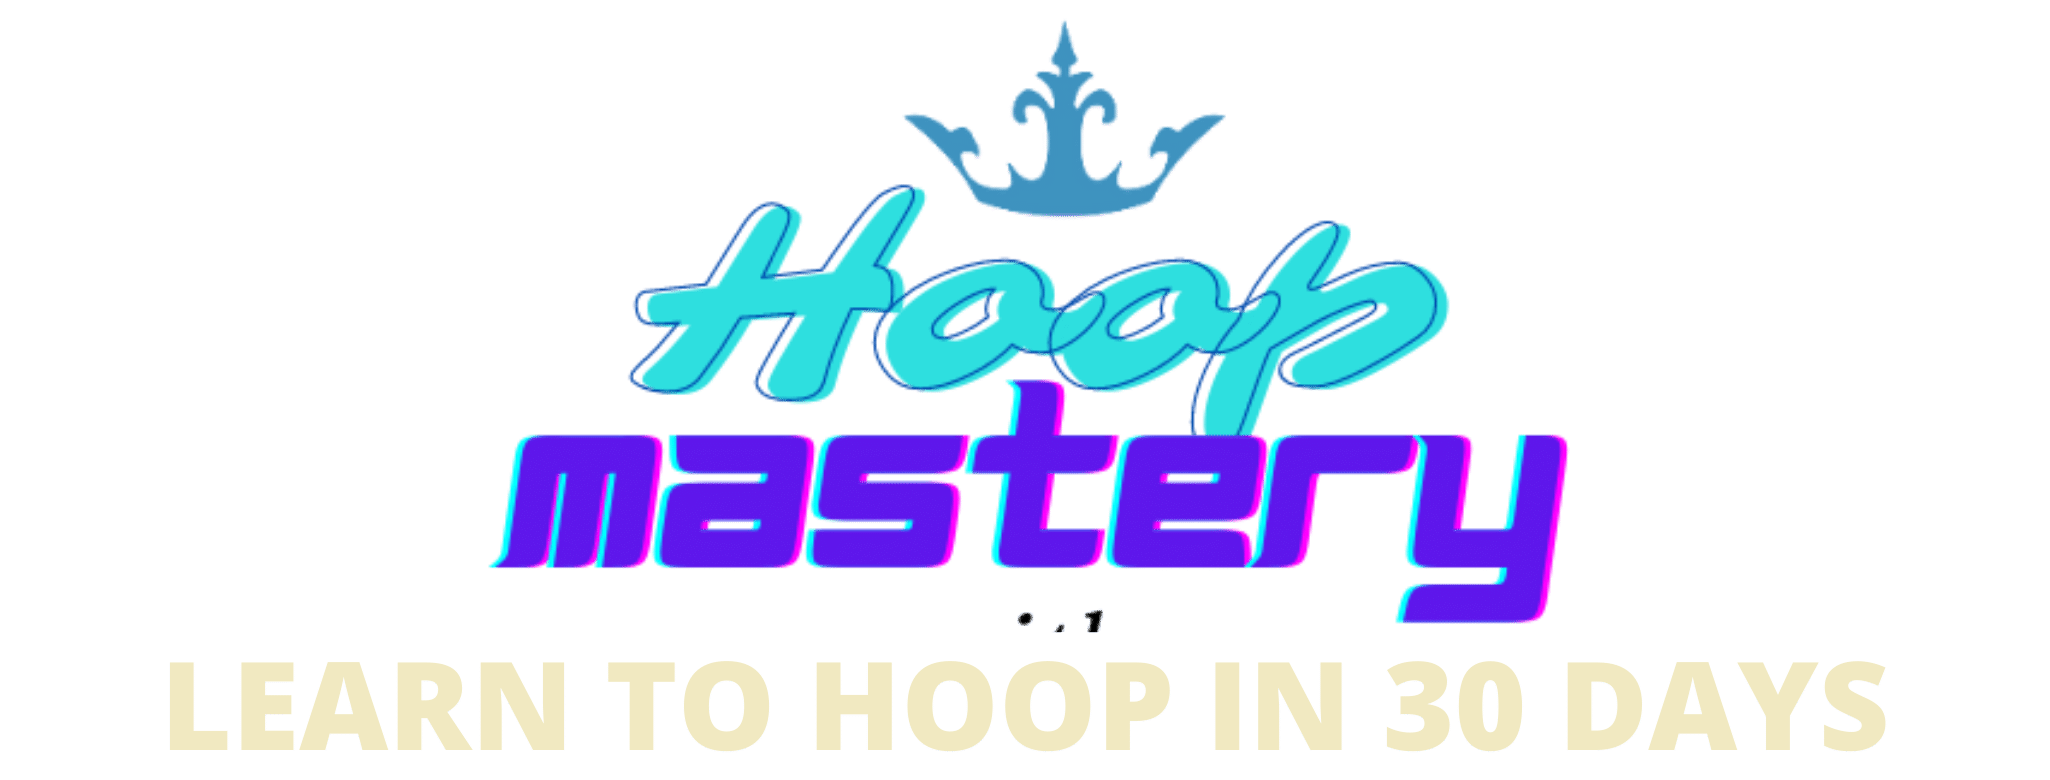 Learn to Hoop in 30 Days